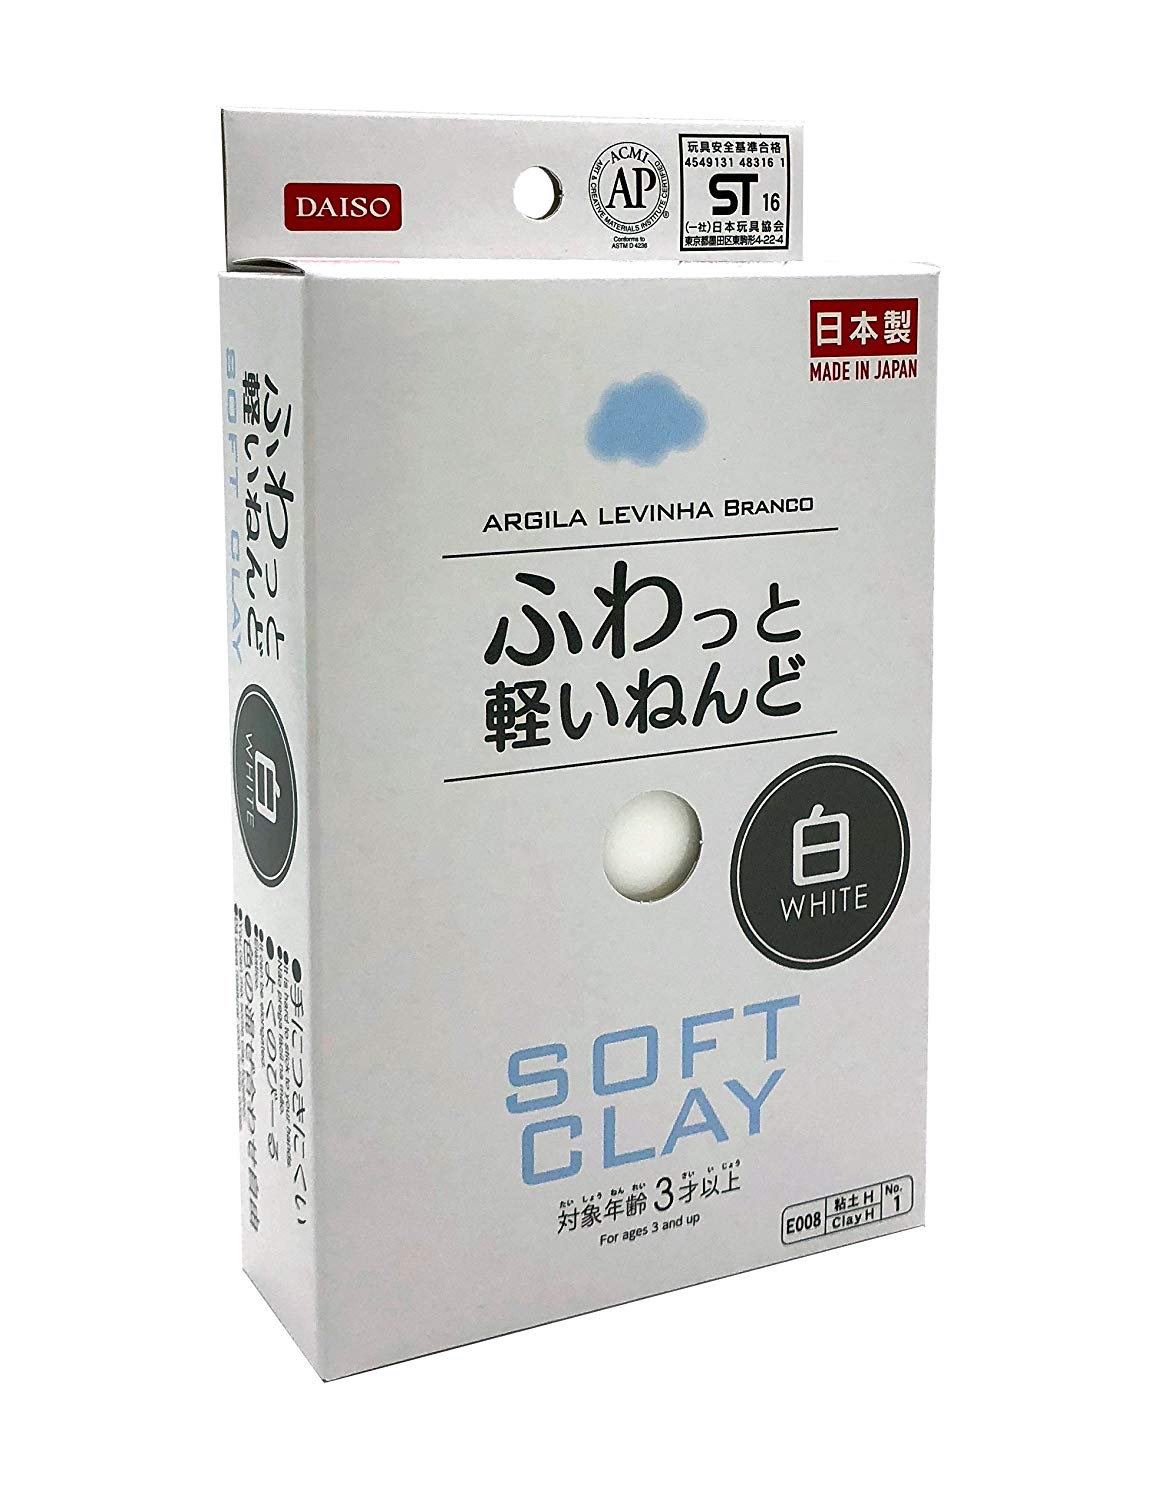 Universal New Packaging For Japan's DAISO Clay Toy Ultra-light